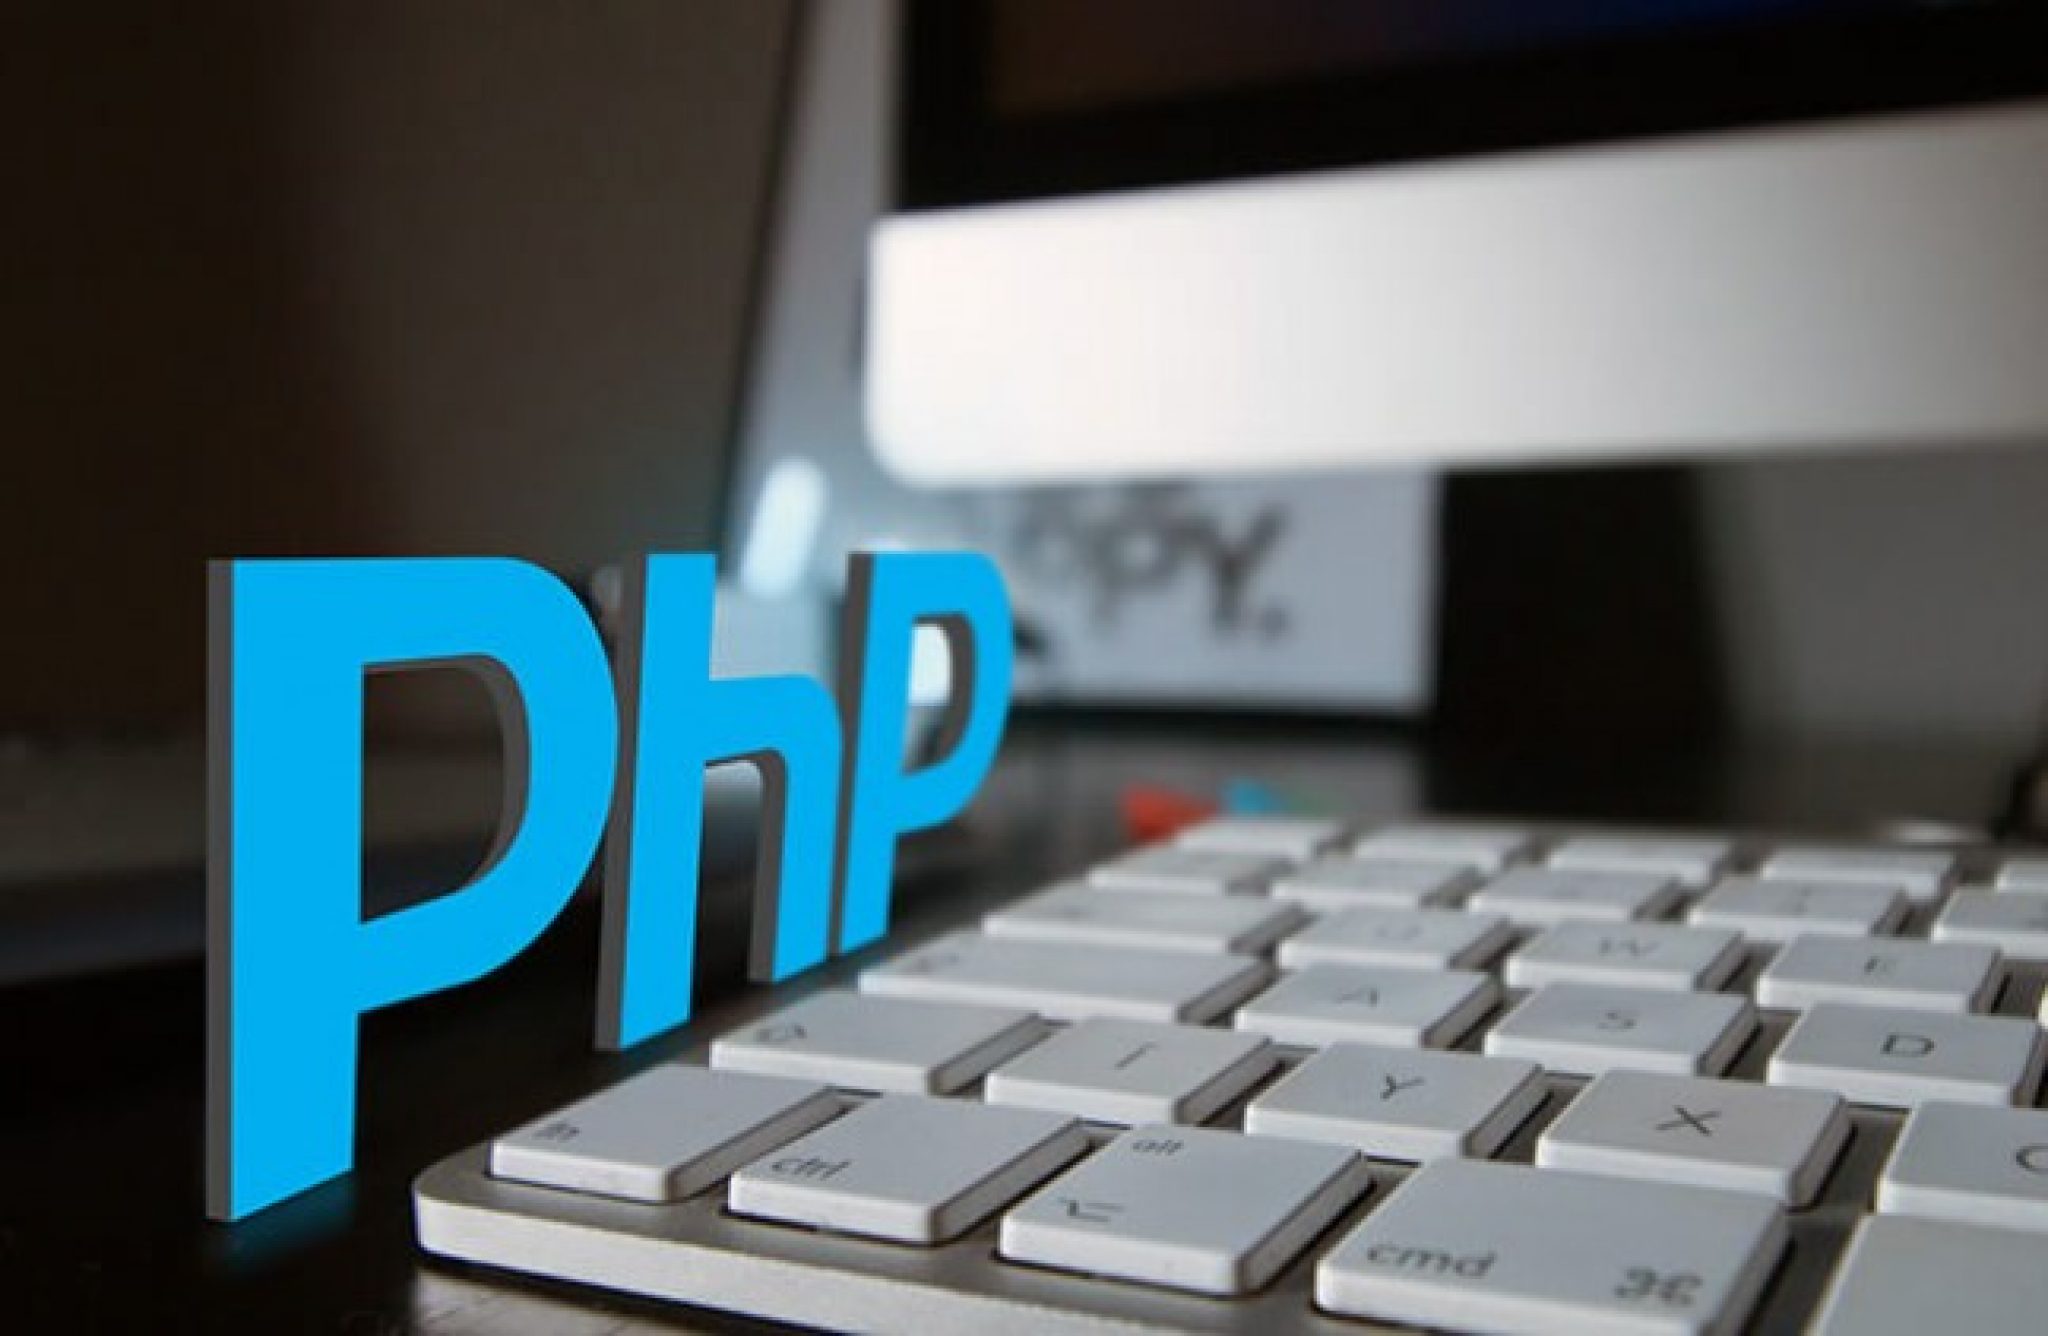 Http shops html. Php обои. Php фото. Php заставка. Php разработка.